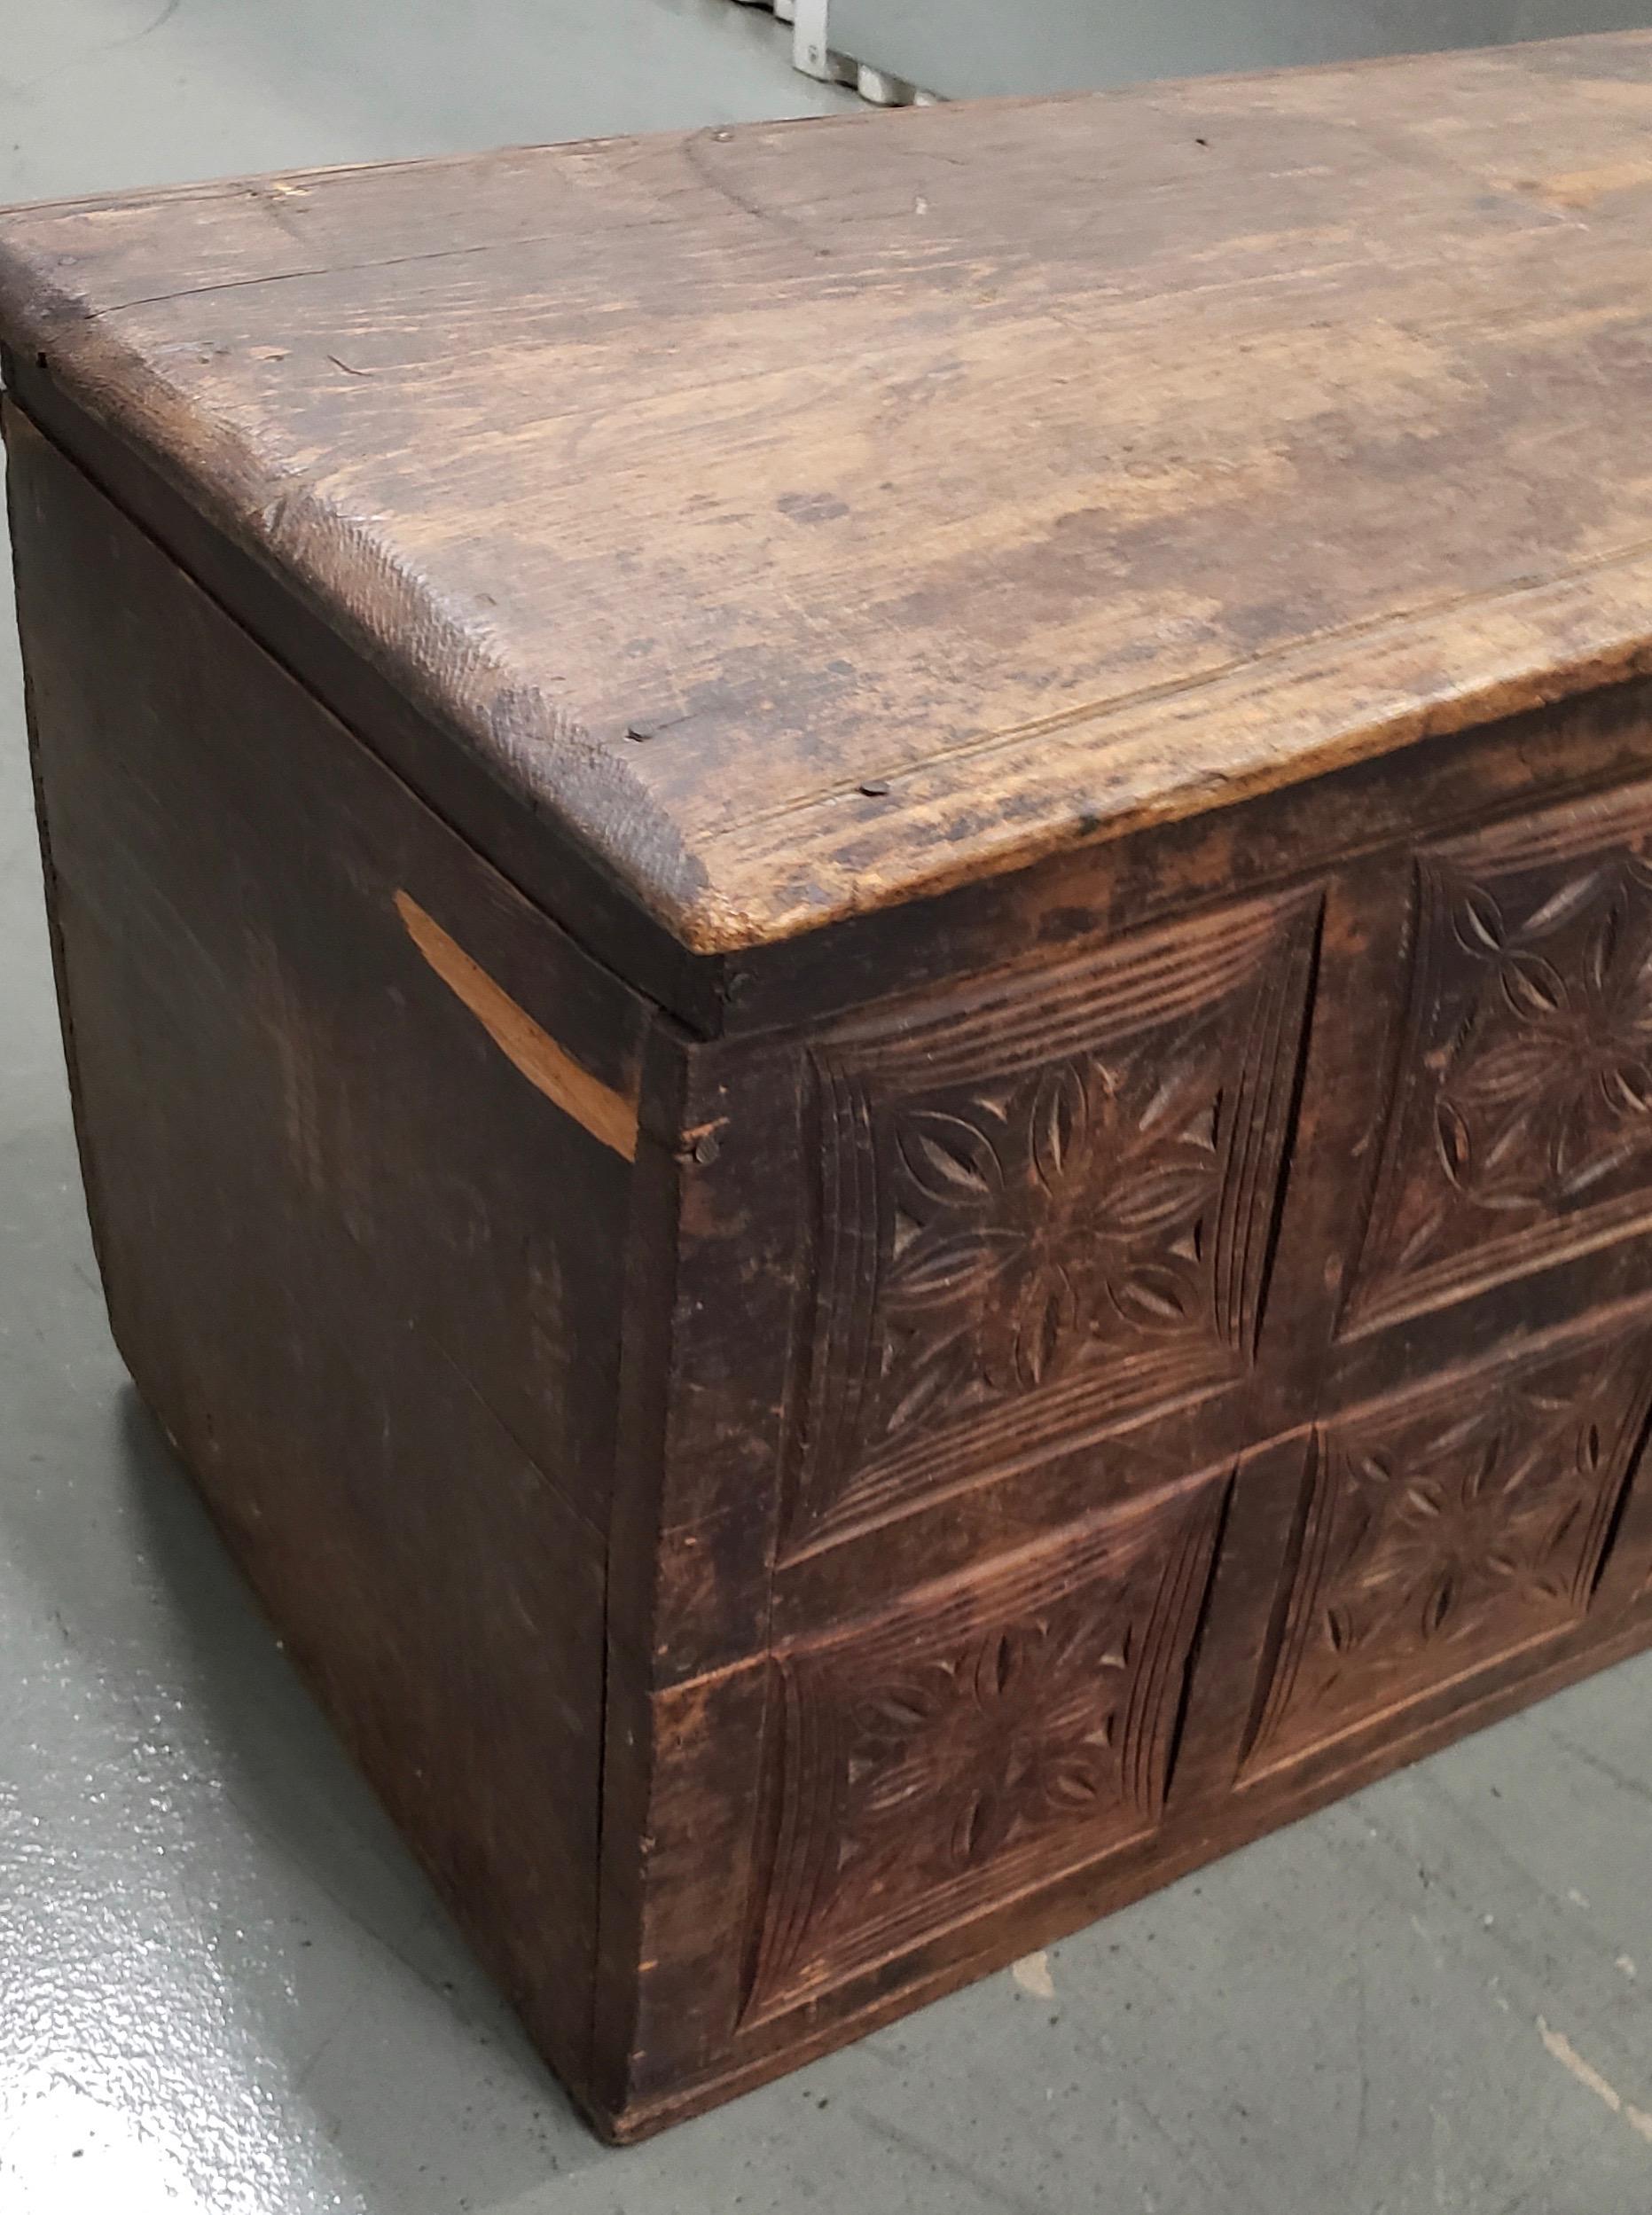 18th century European carved pine trunk

Brilliant antique trunk / blanket chest from Europe. This can also be used as a toy chest, games chest, linen chest, etc.

The chest measures 33